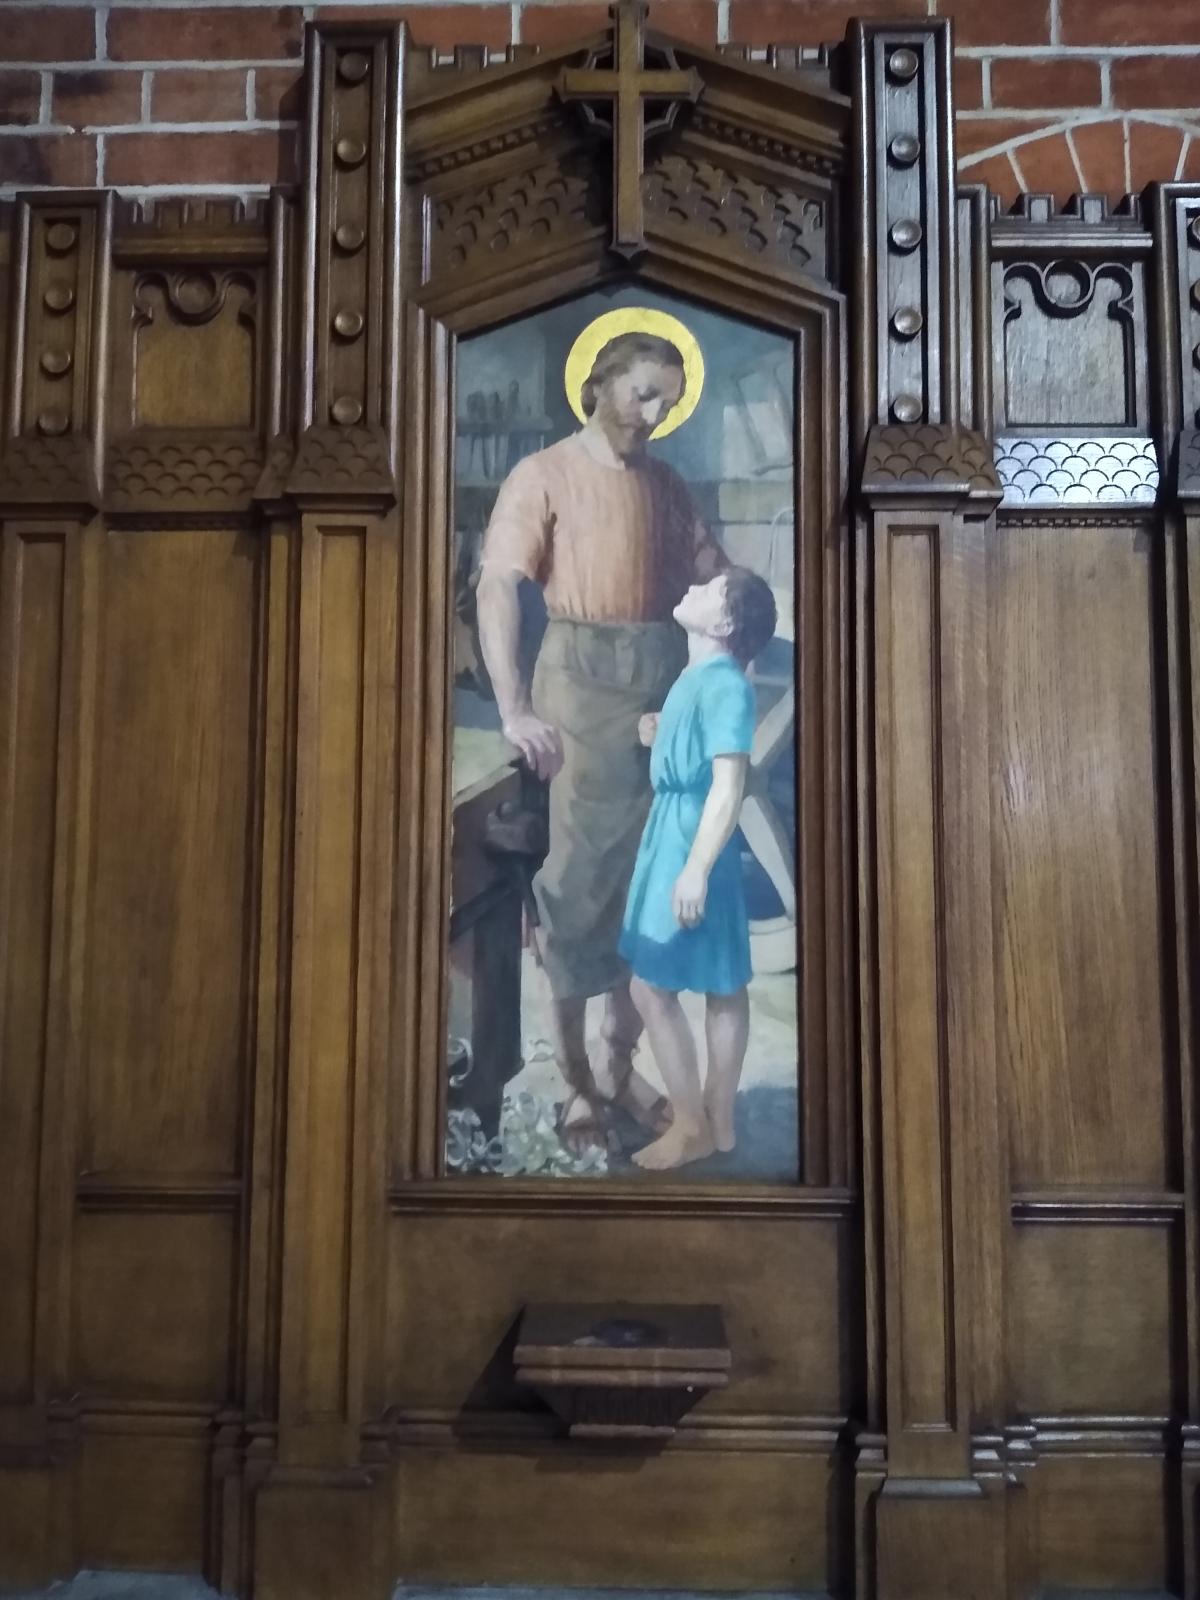 Encountering St Joseph in daily life  - Diocese of Westminster